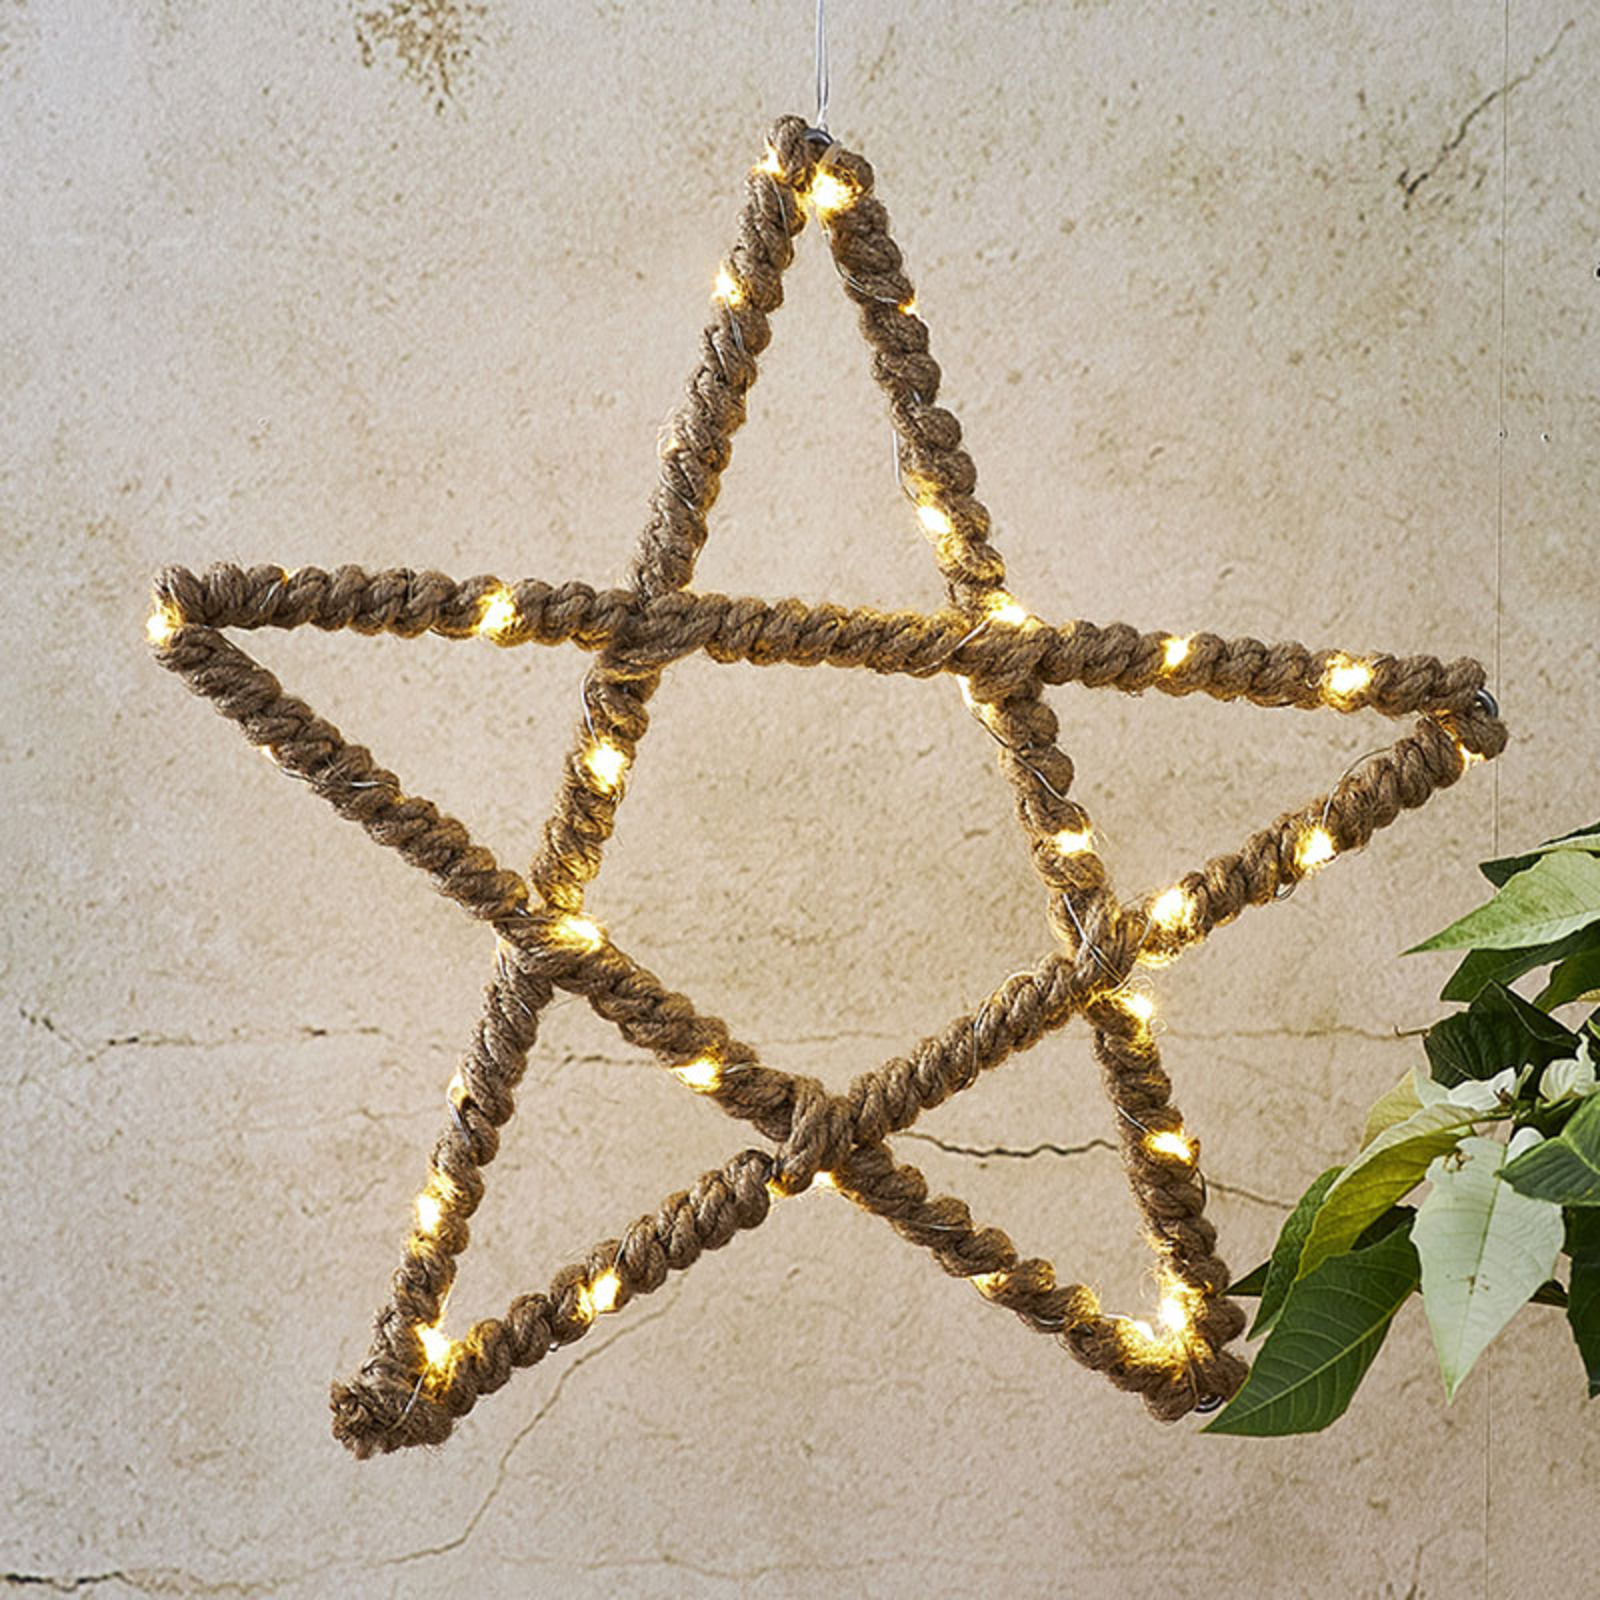 Jutta LED decorative star, wrapped in jute rope